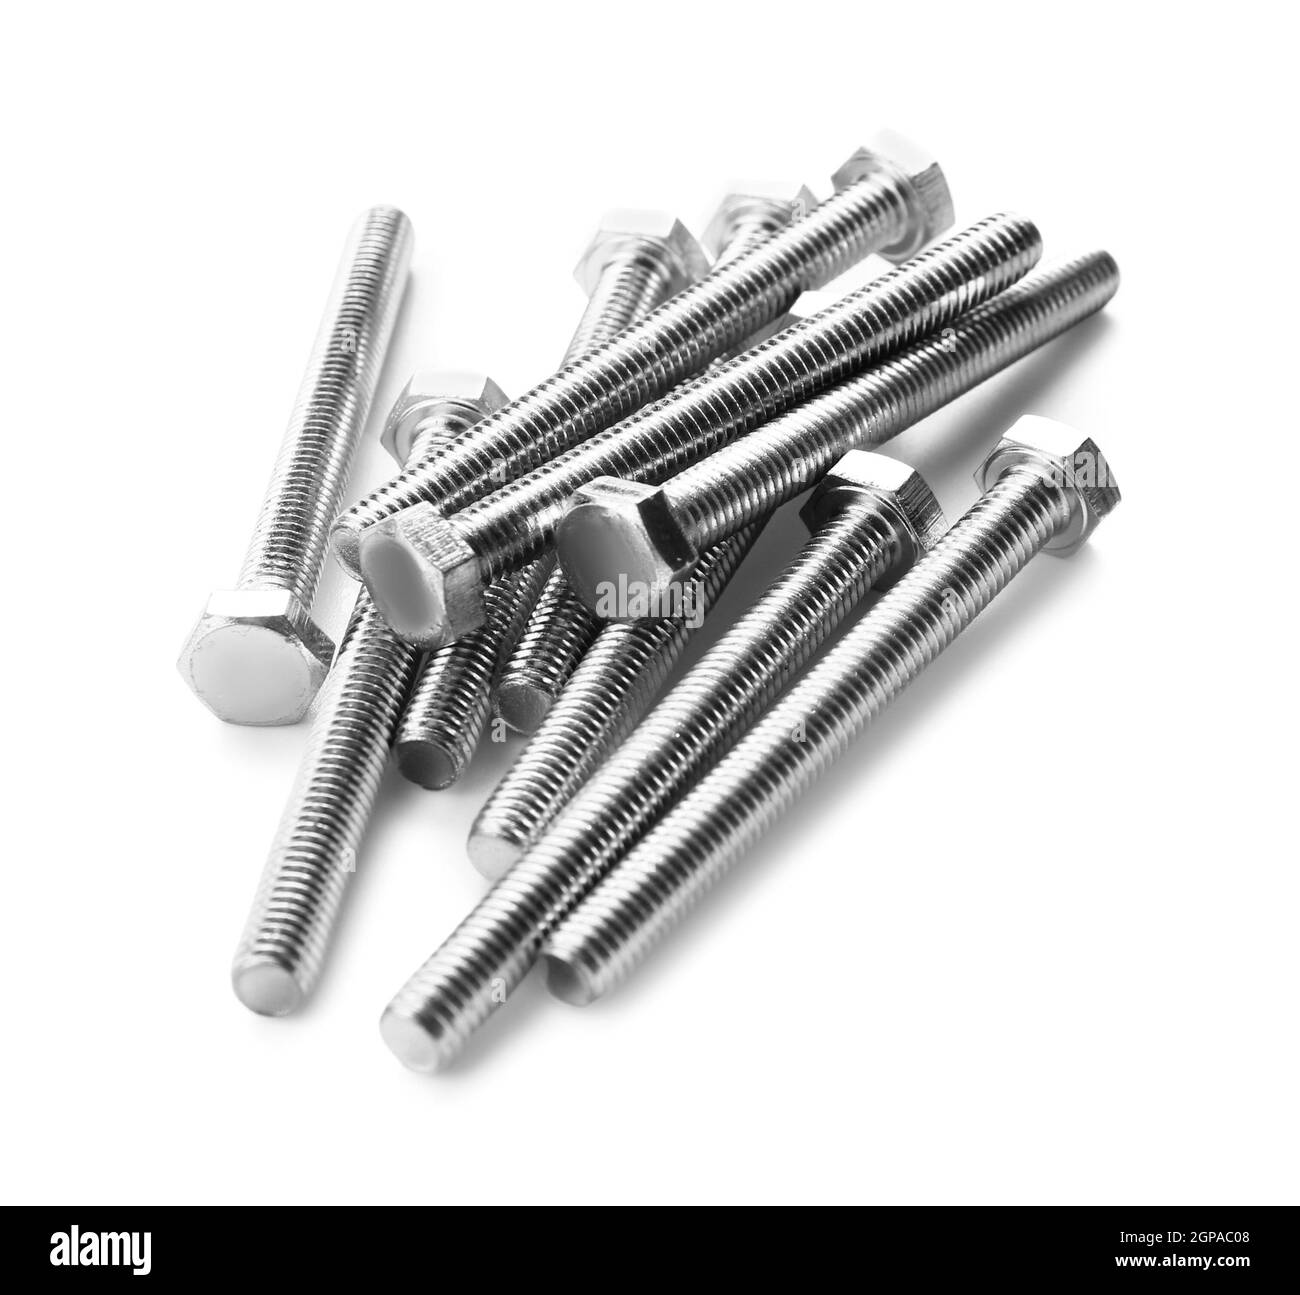 Pile of metal hex bolts on white background Stock Photo